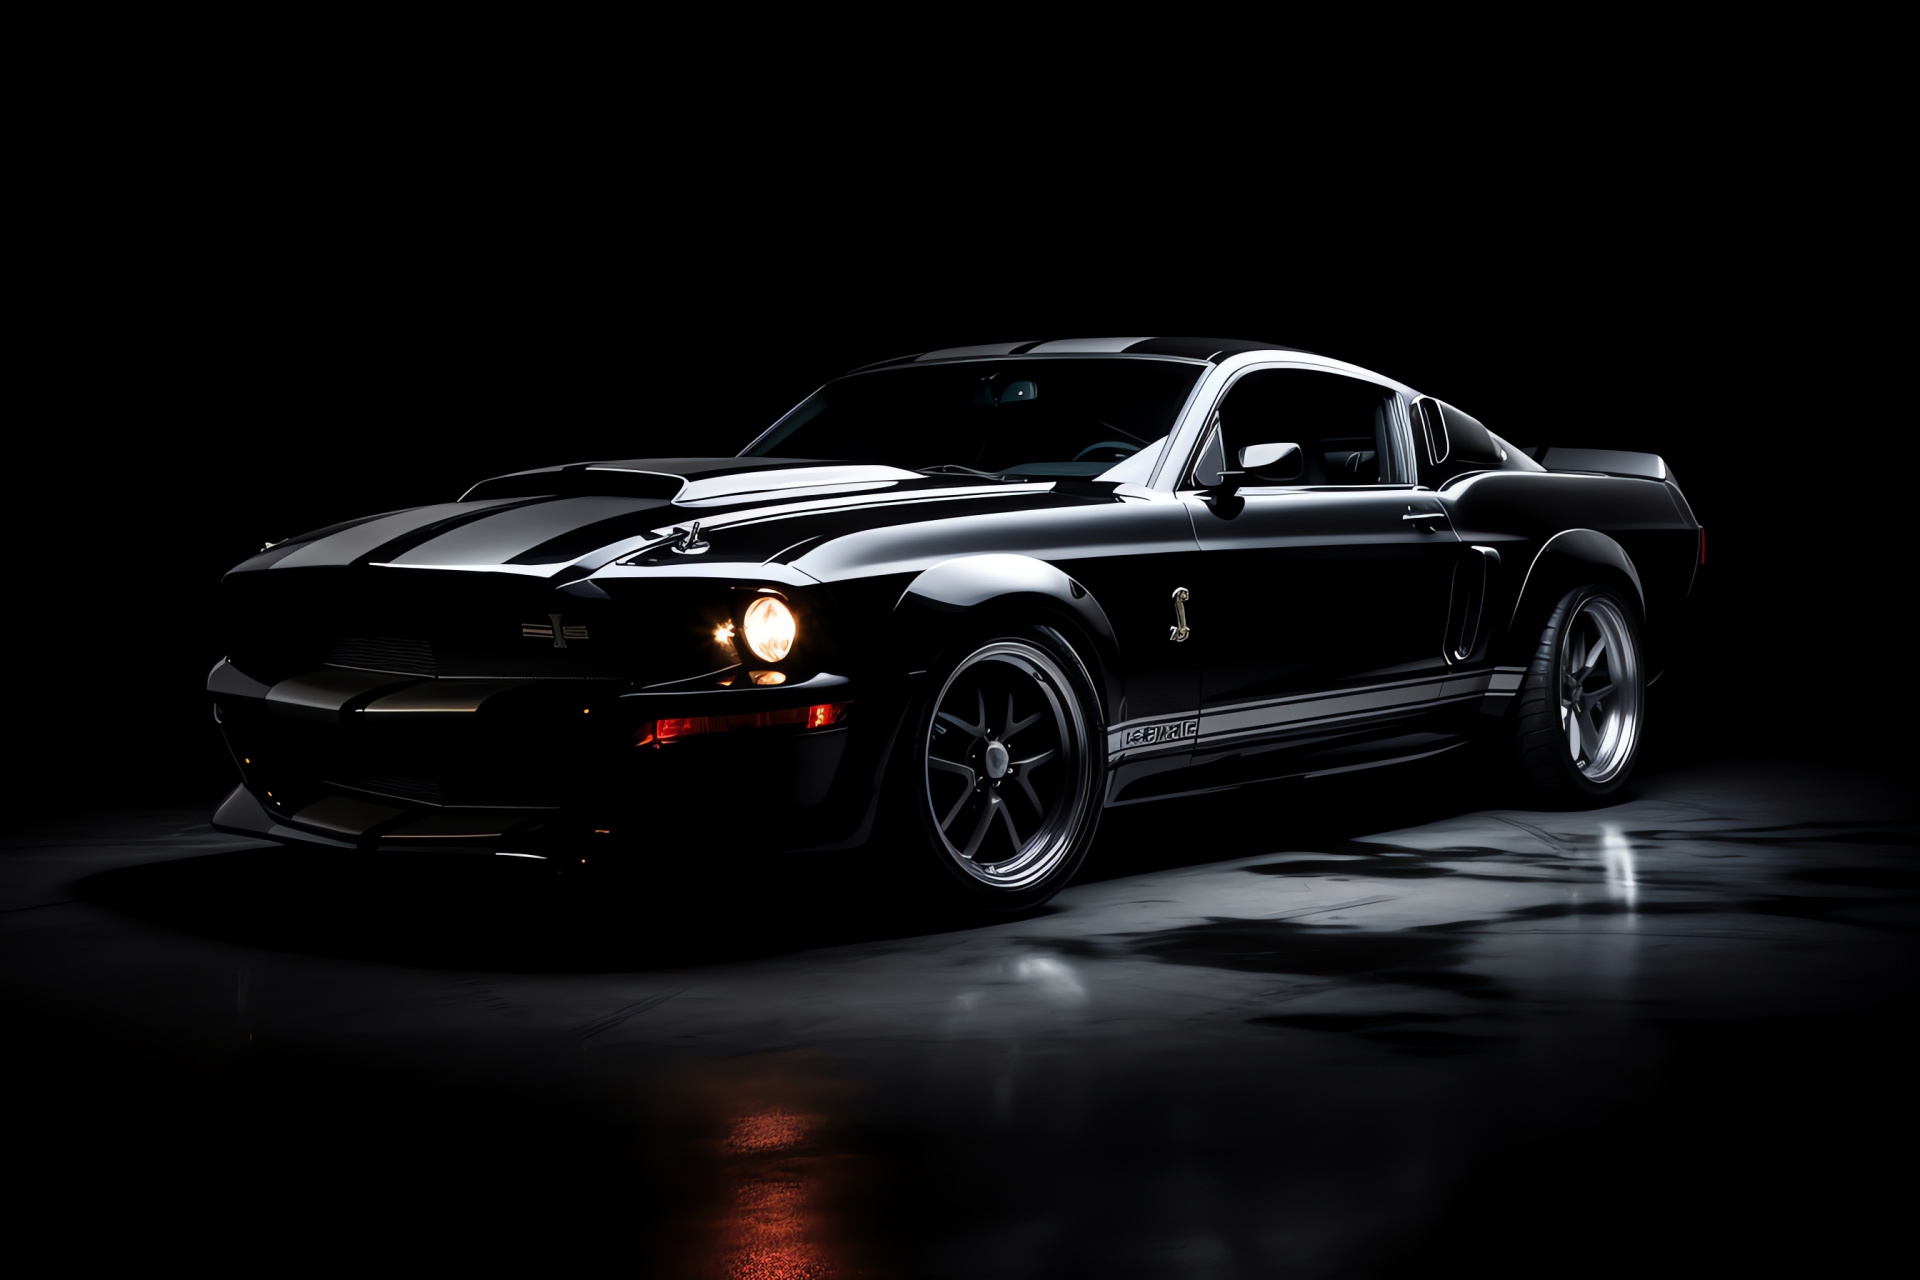 Mustang poise, Pitch-black canvas, Elevated car shot, Dominant posture, Automotive prowess, HD Desktop Wallpaper